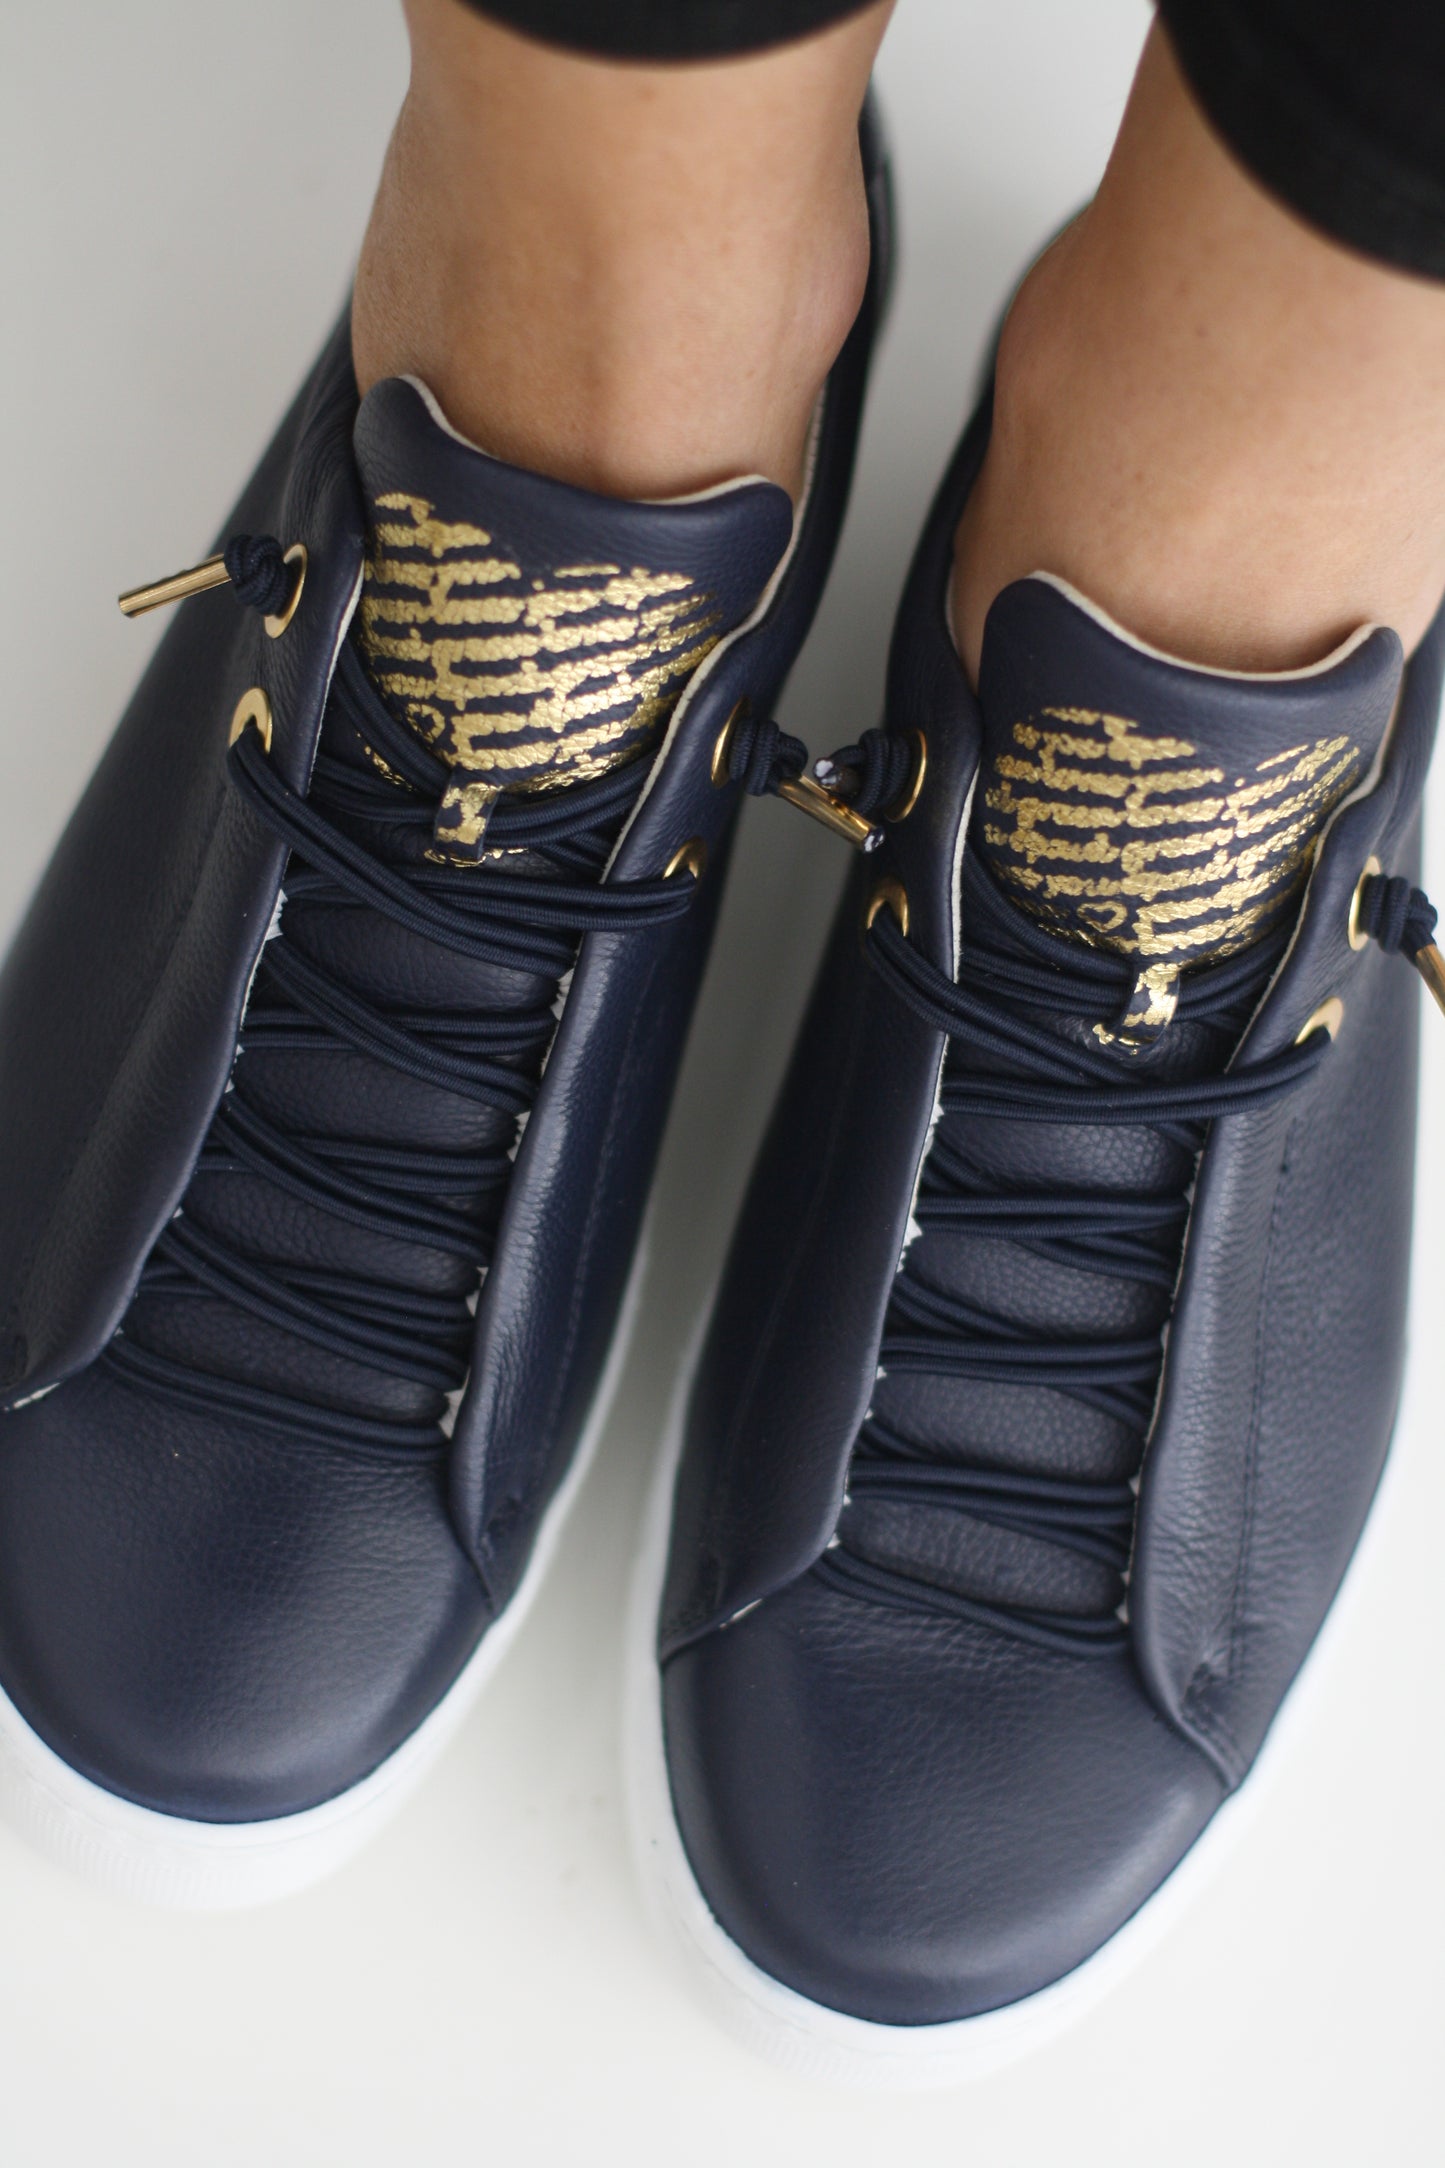 PAUL GREEN 5017 NAVY LEATHER TRAINER